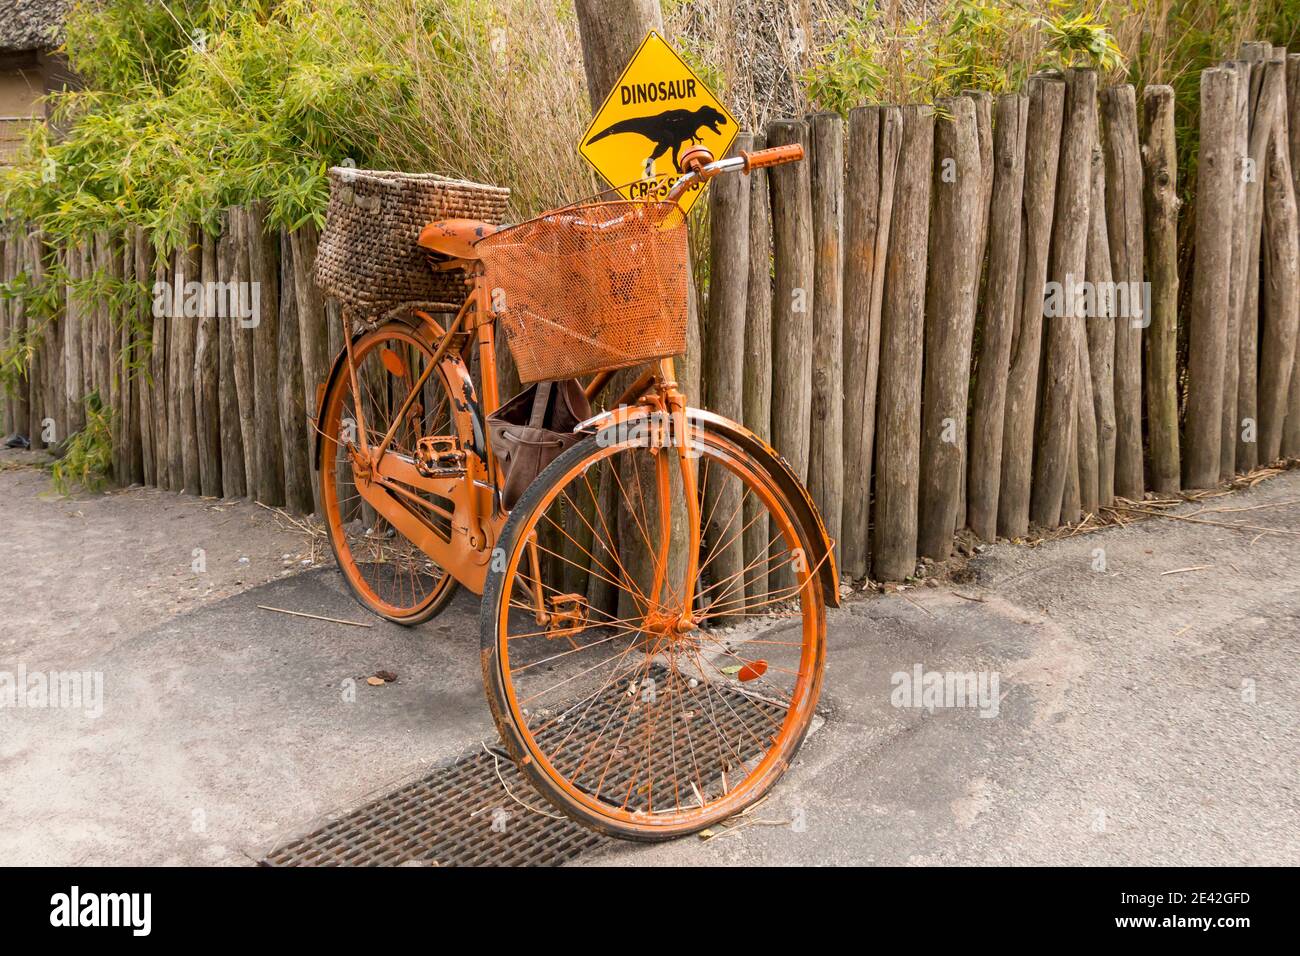 Aalborg, Denmark - 25 Jul 2020: An old orange bicycle is parked up by a wooden fence, signposted with crossing traffic of dinosaurs Stock Photo